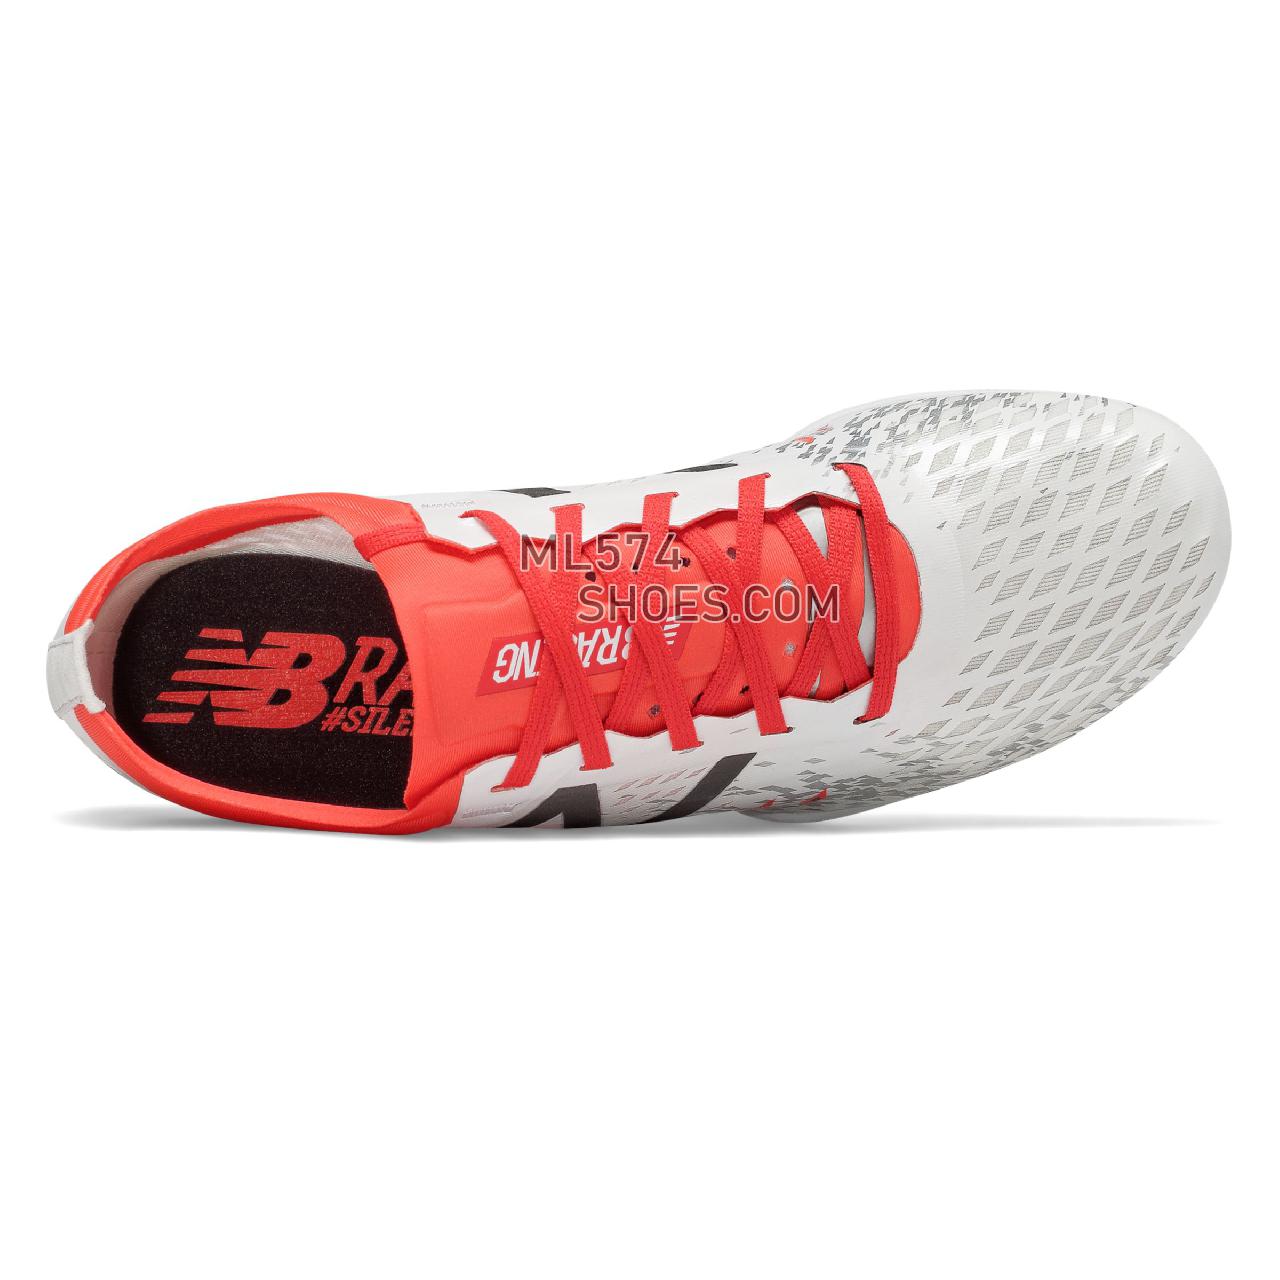 New Balance MD800v5 Spike - Women's Md800V5 Spike - Running - White with Flame and Black - WMD800F5